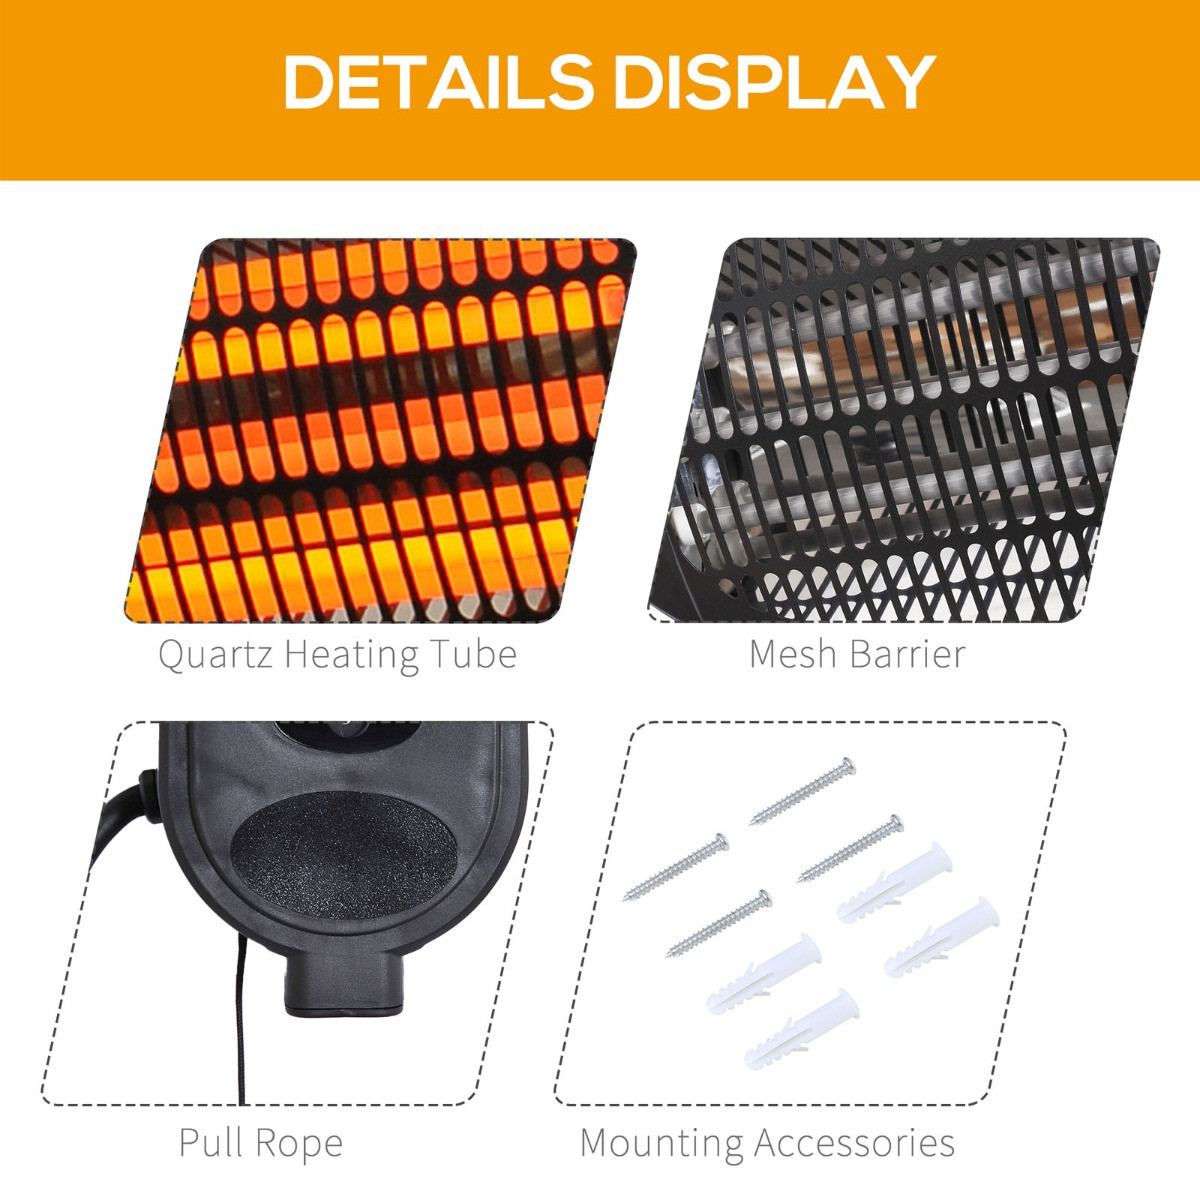 Outsunny Wall Mounted Infrared Electric Patio Heater, 2kW - Black>